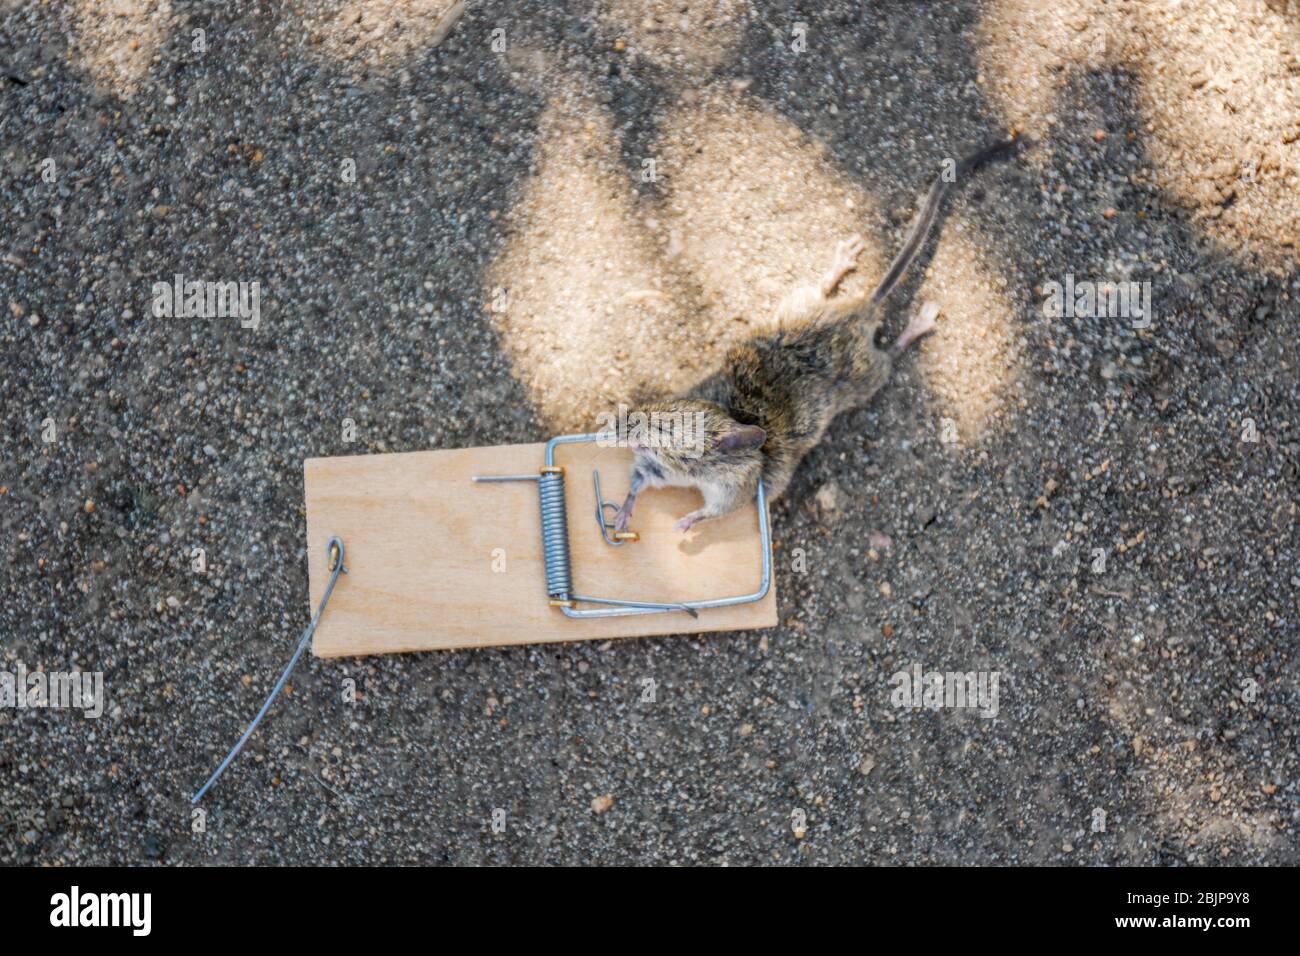 Dead mouse caught in snap trap outdoors Stock Photo - Alamy